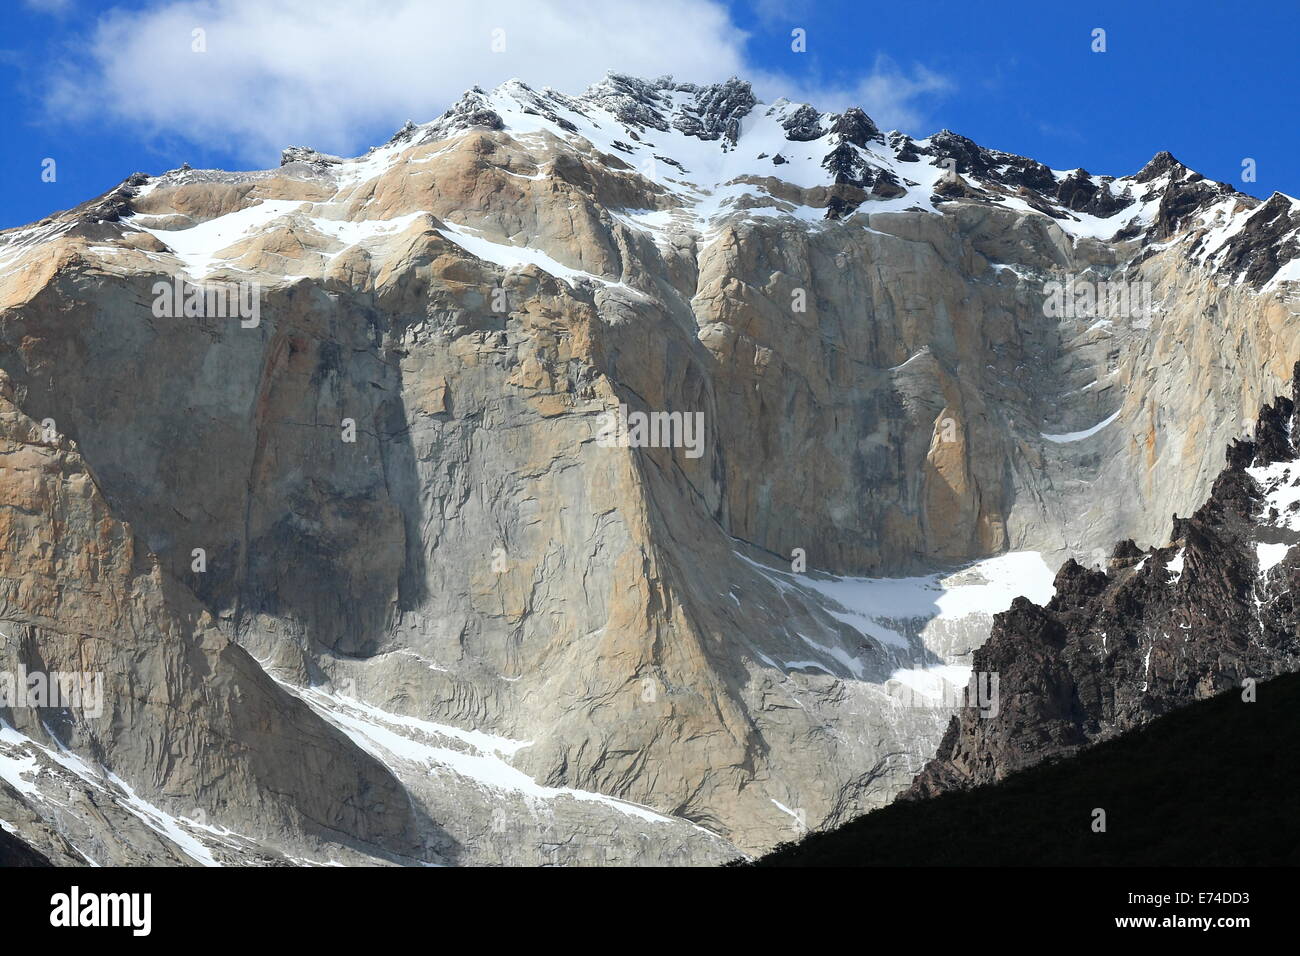 The sheer rock faces of the mountains in Torres del Paine National Park, Chile. Stock Photo